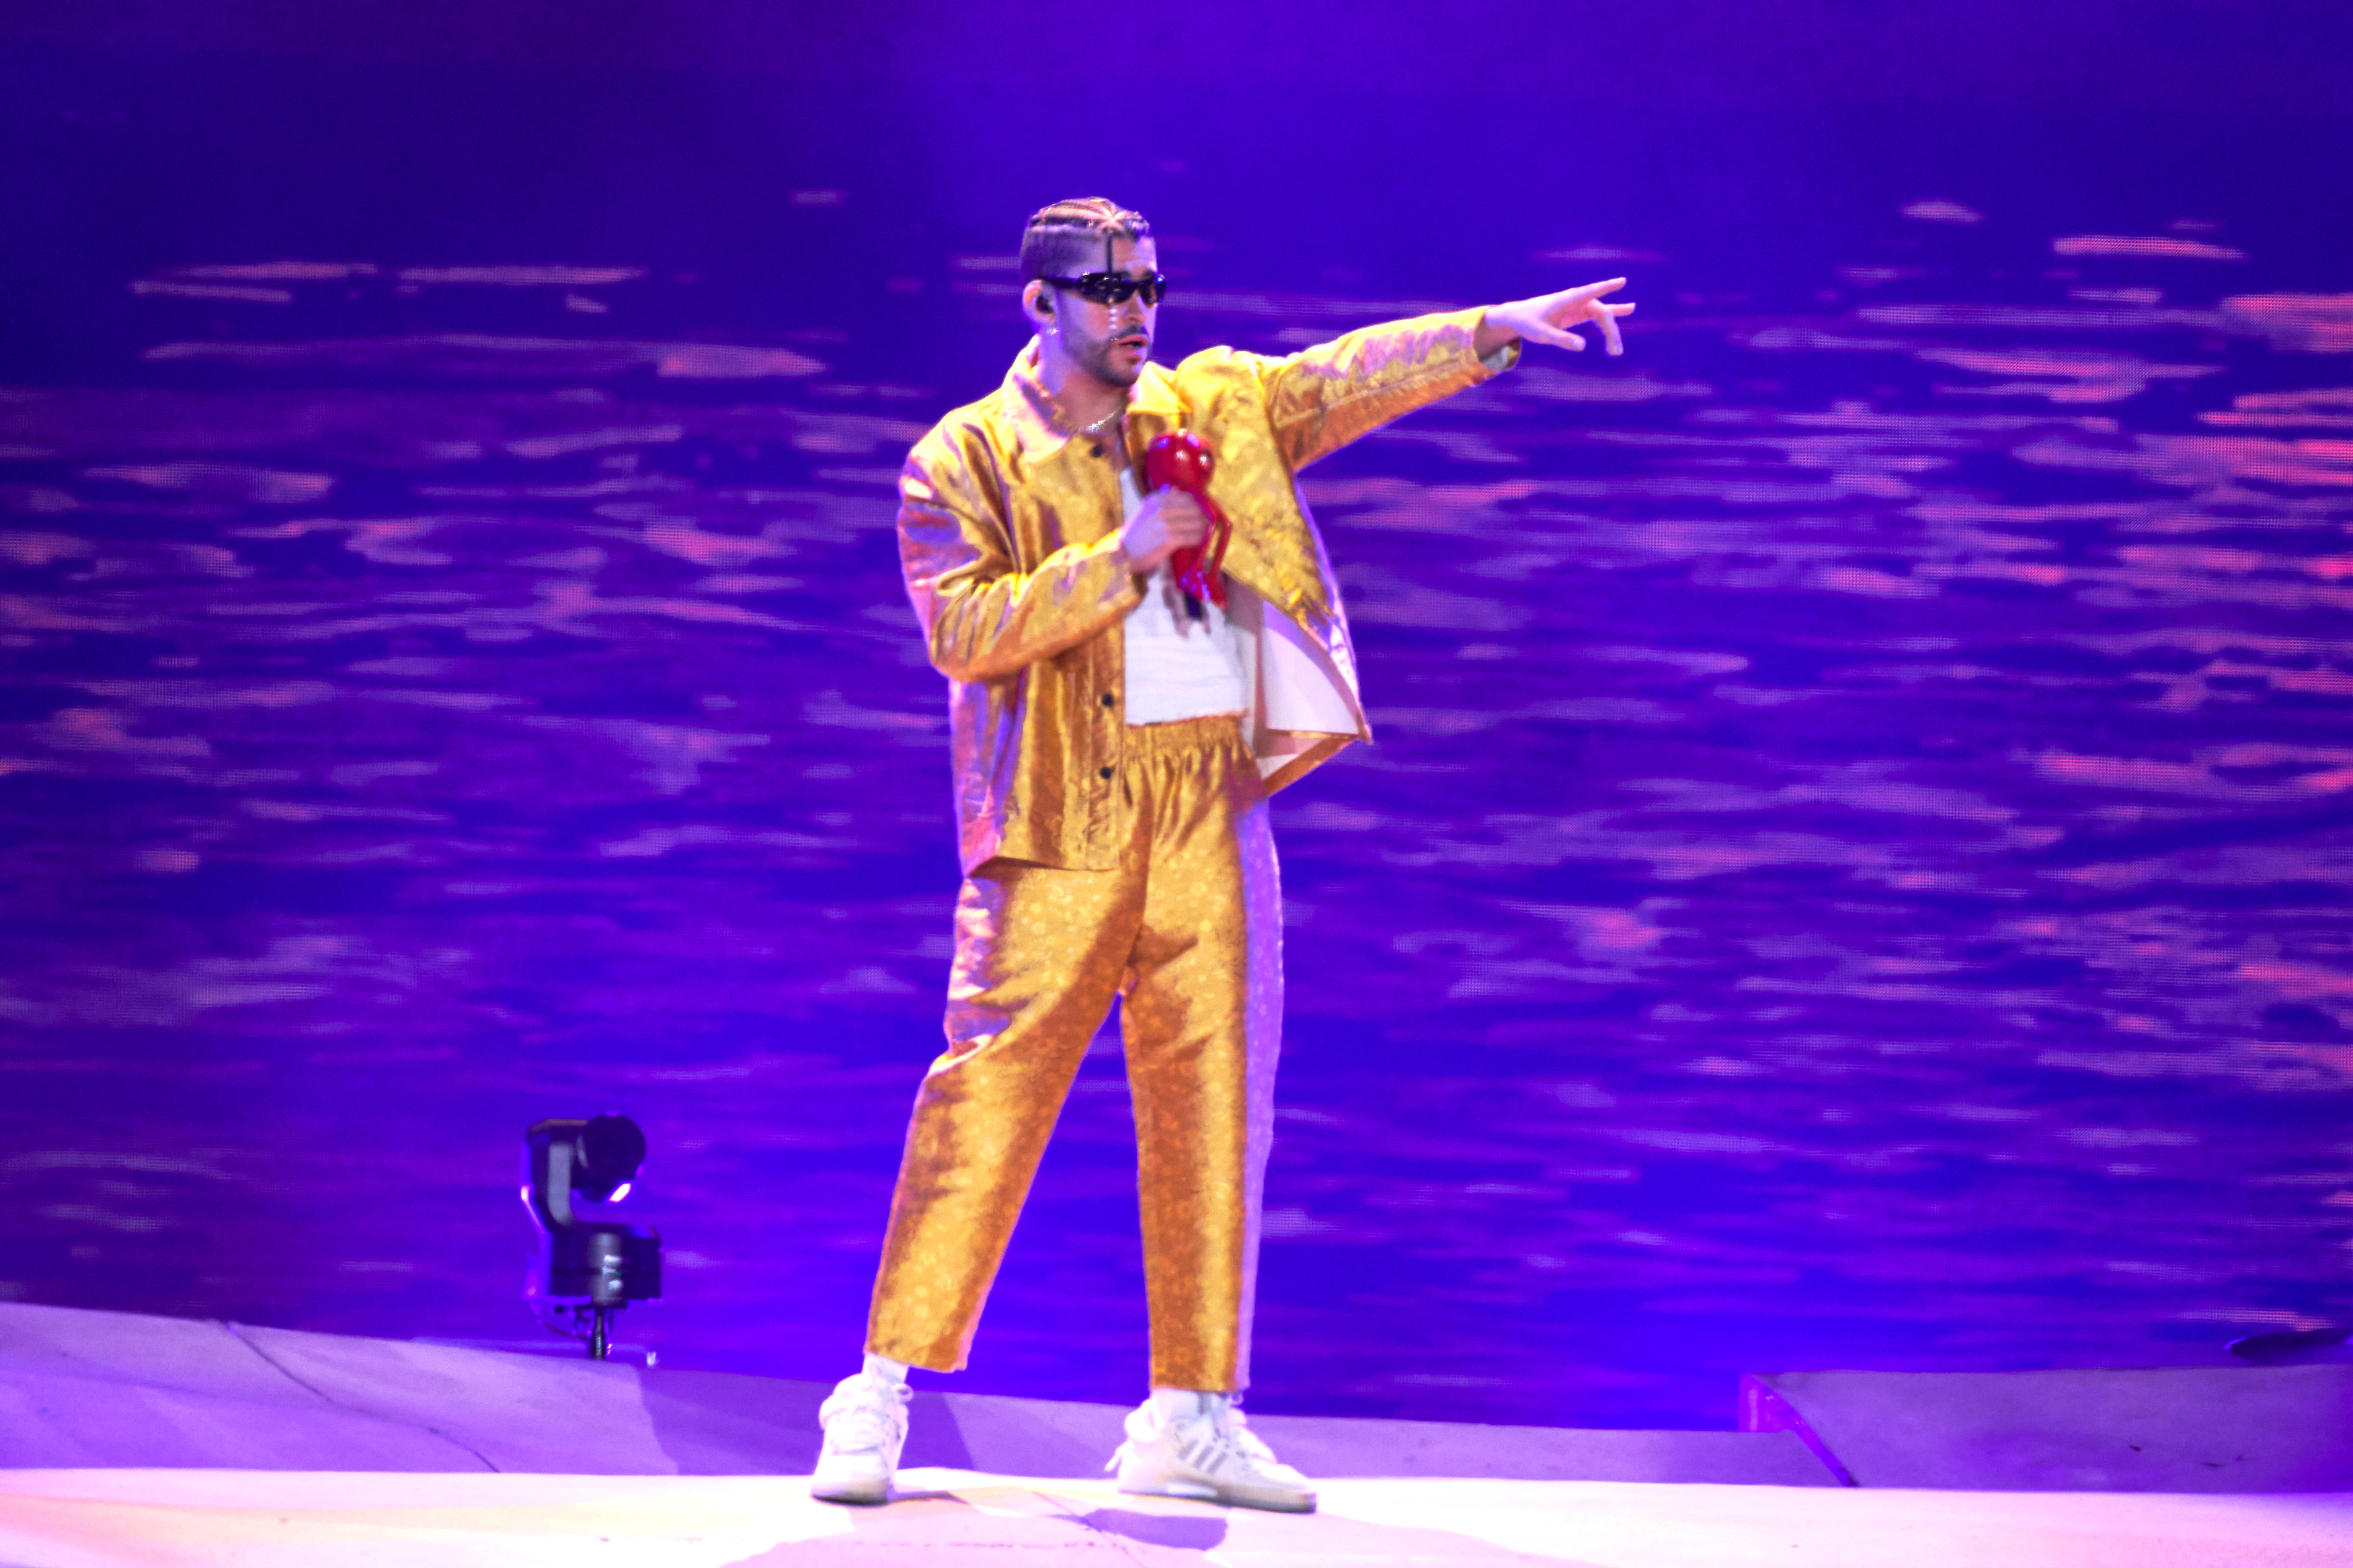 Bad Bunny performing during his second concert at Azteca Stadium, as a part of World Hottest Tour